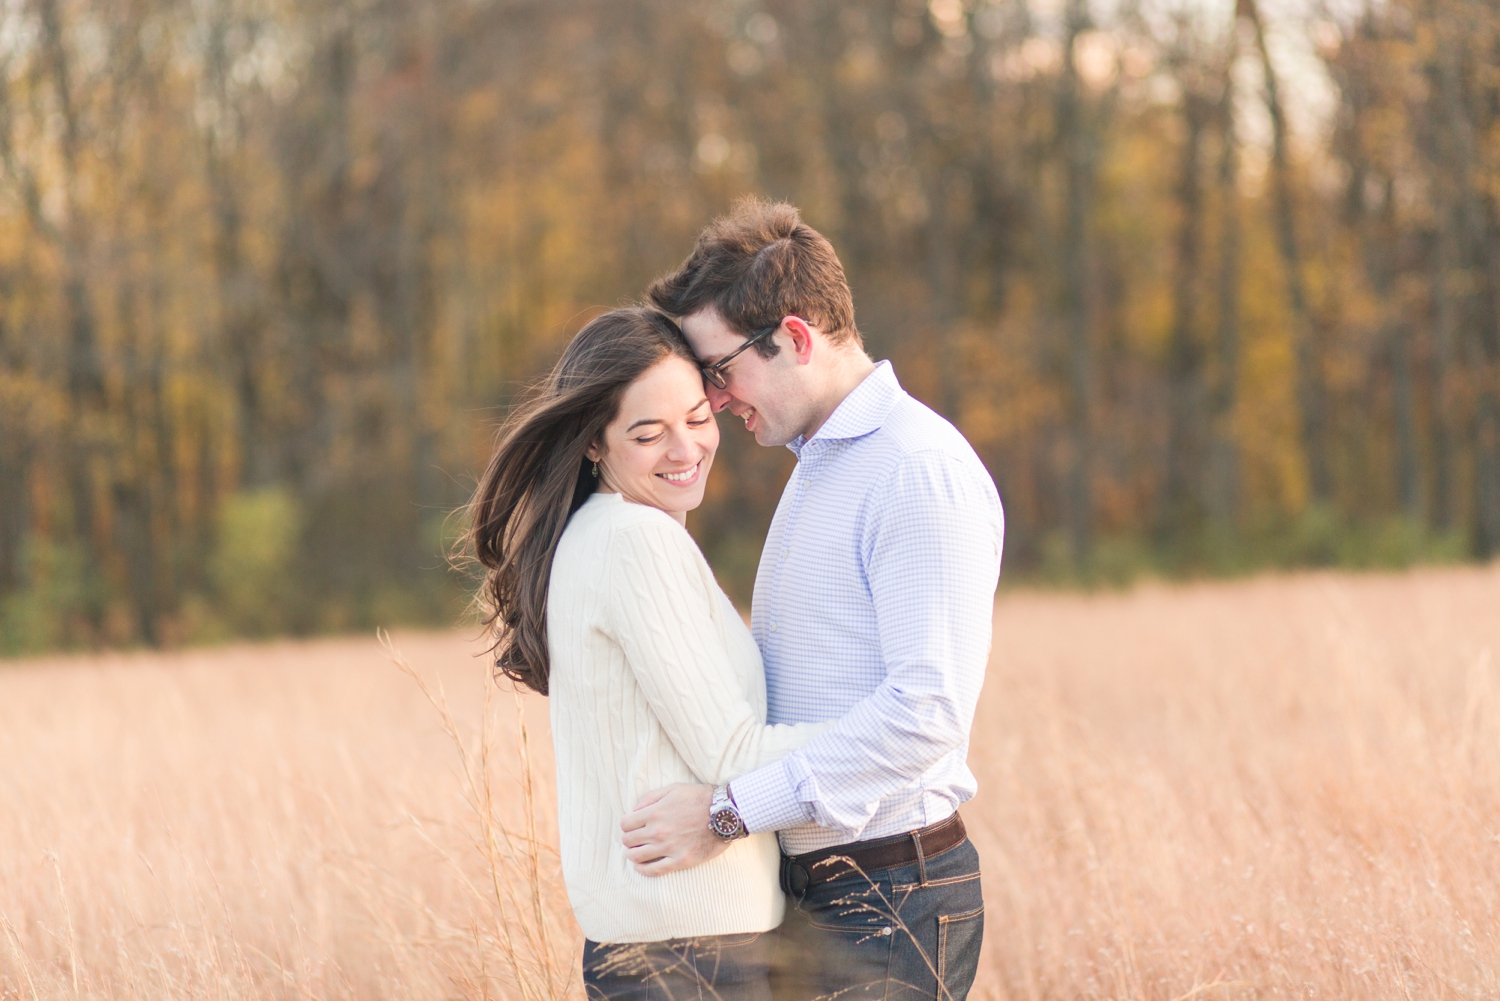 waveny-park-engagement-session-new-canaan-connecticut-wedding-photographer-ss-shaina-lee-photography-photo